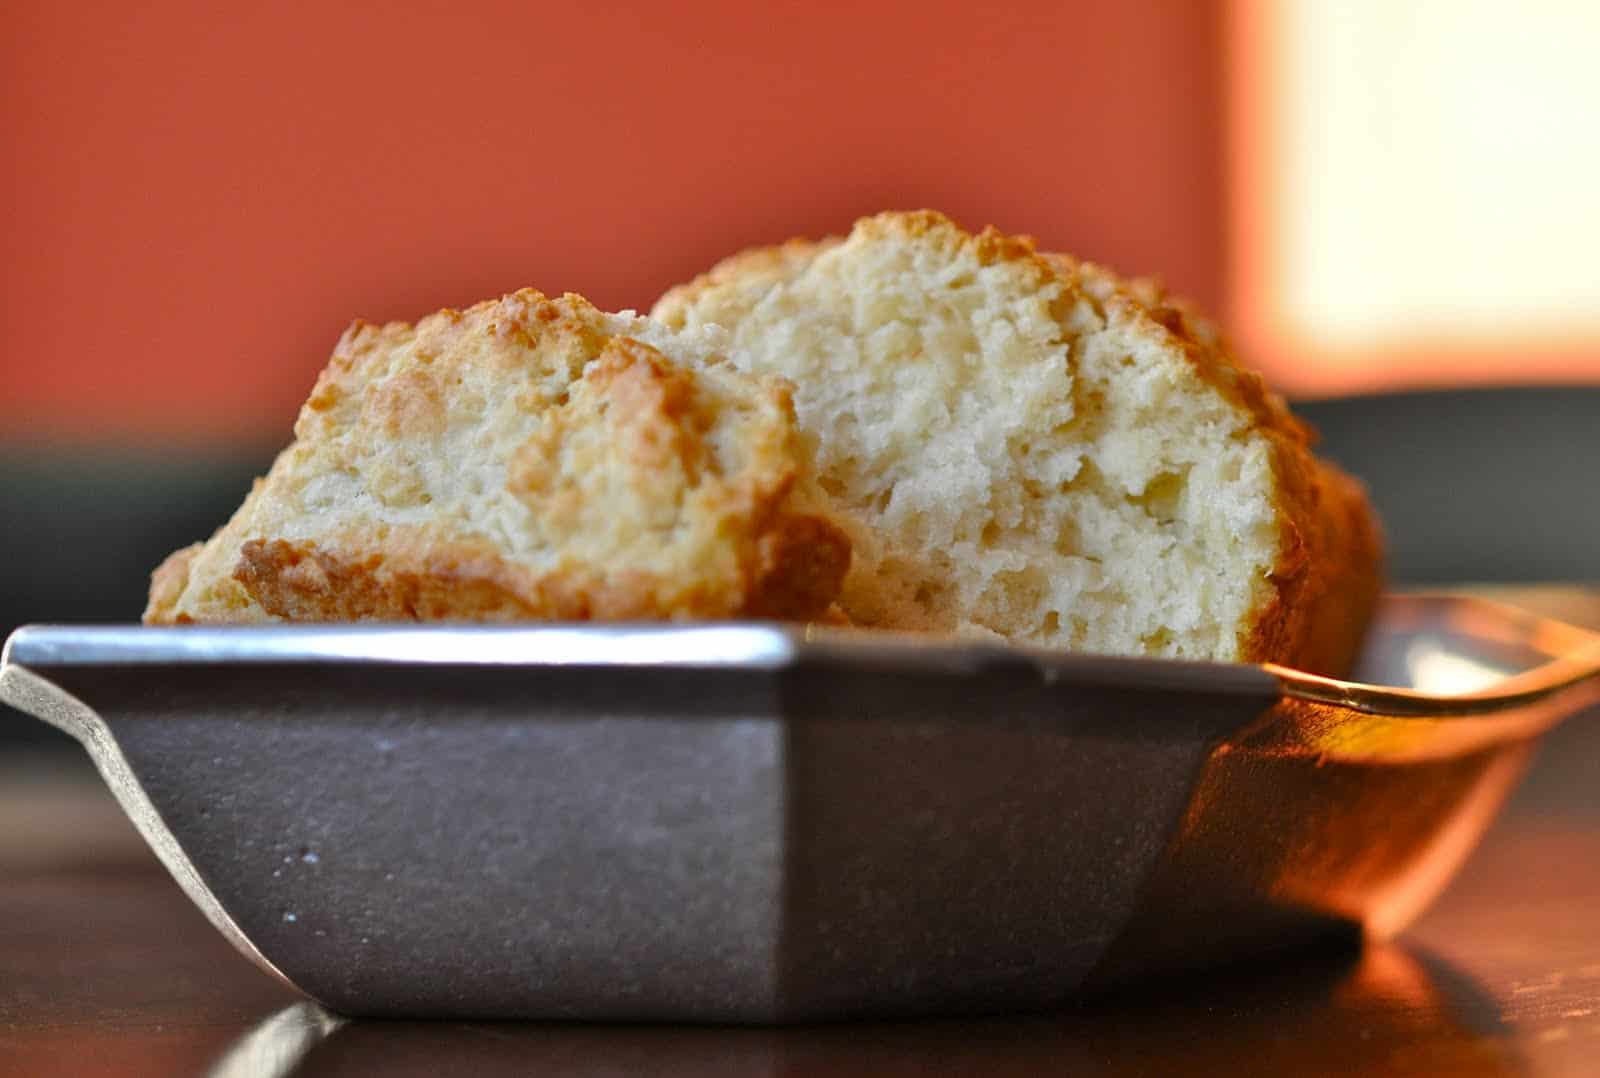 Uncle Hal's Homemade Biscuits served as a loaf in a pewter basket.